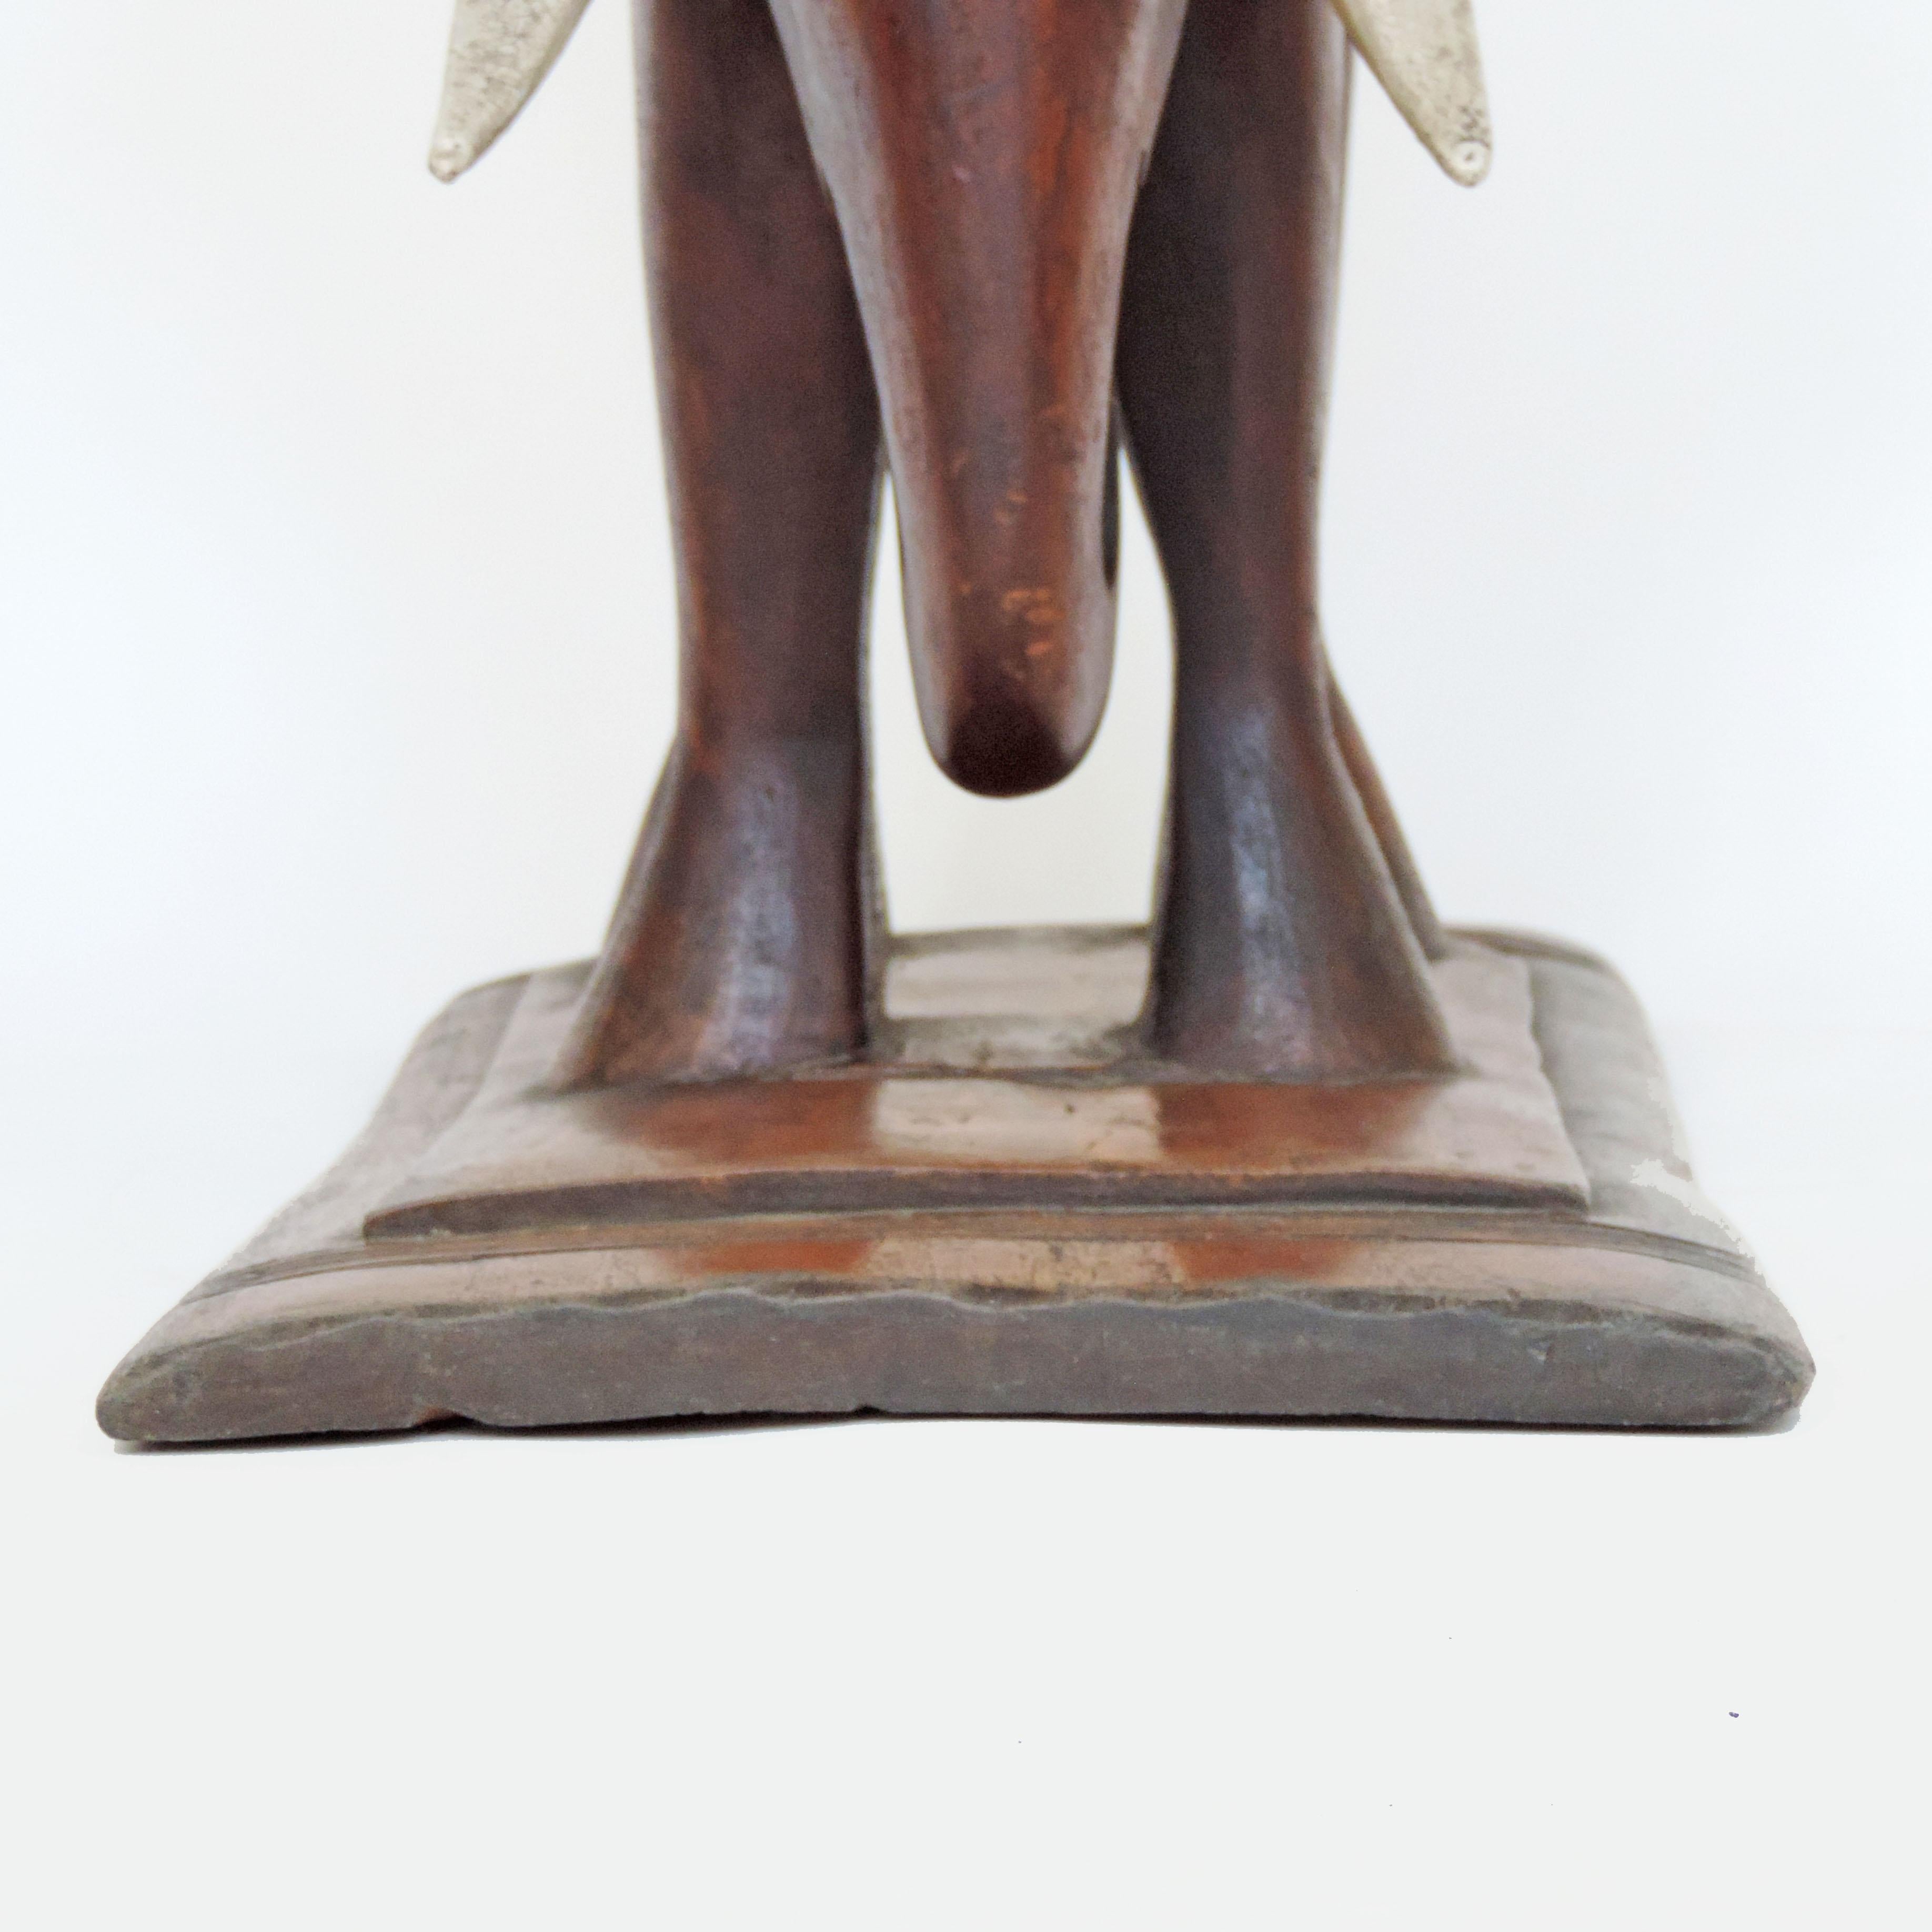 African Art Deco Ashanti Elephant Stool, Ghana, 1920s In Good Condition For Sale In Milan, IT